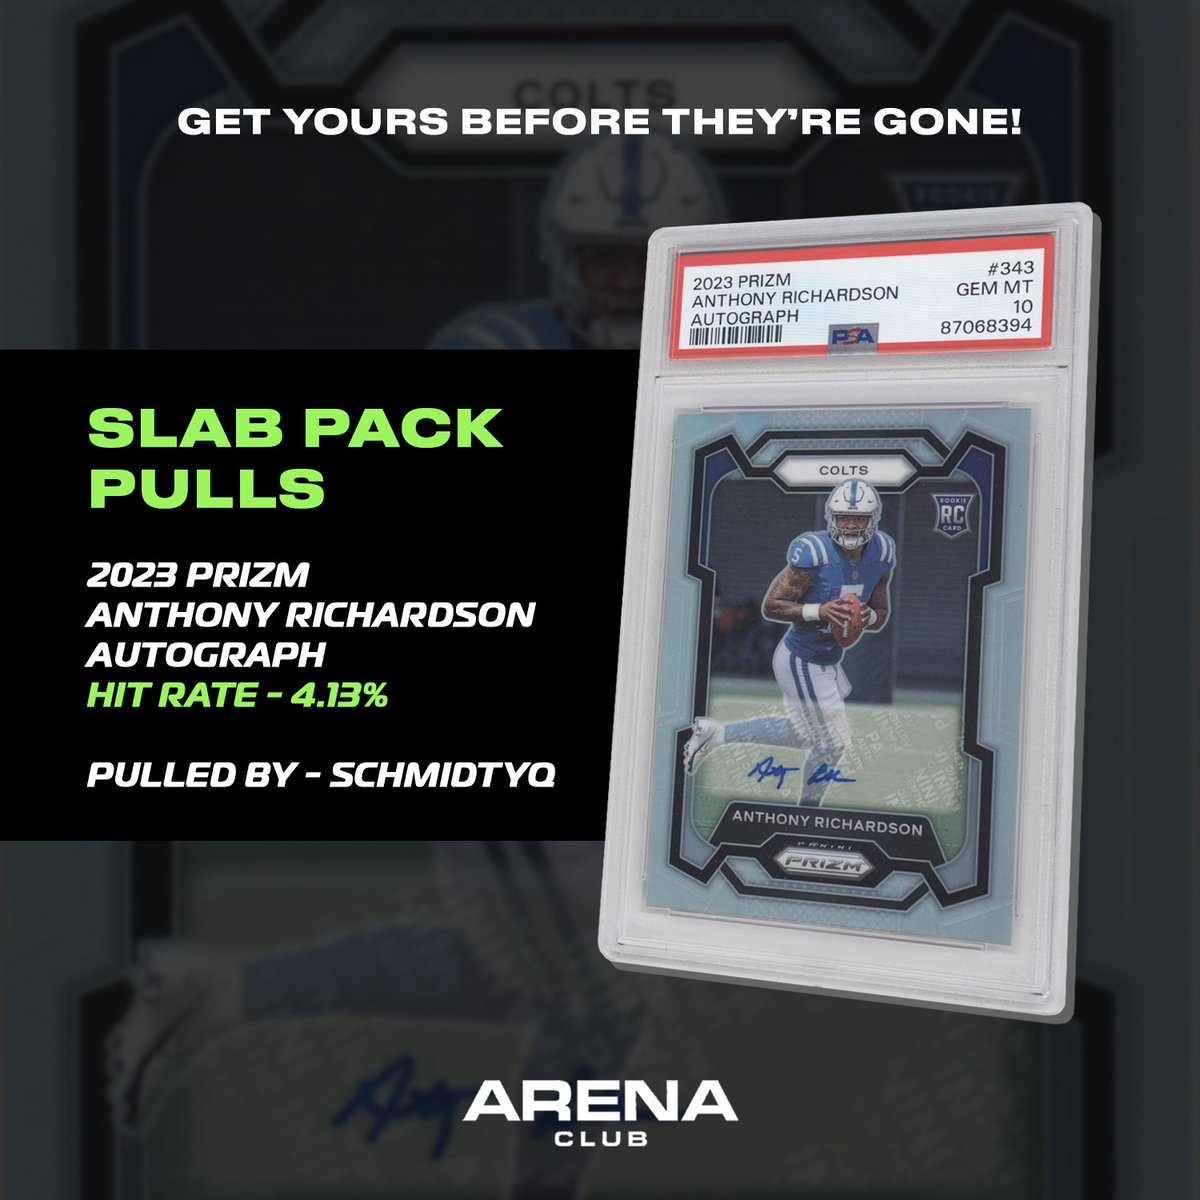 HUGE hits are coming out of the Draft Day Slab Packs! 🏈 🔥 Get yours now before they're all gone! 🚀 #arenaclub #slabpacks